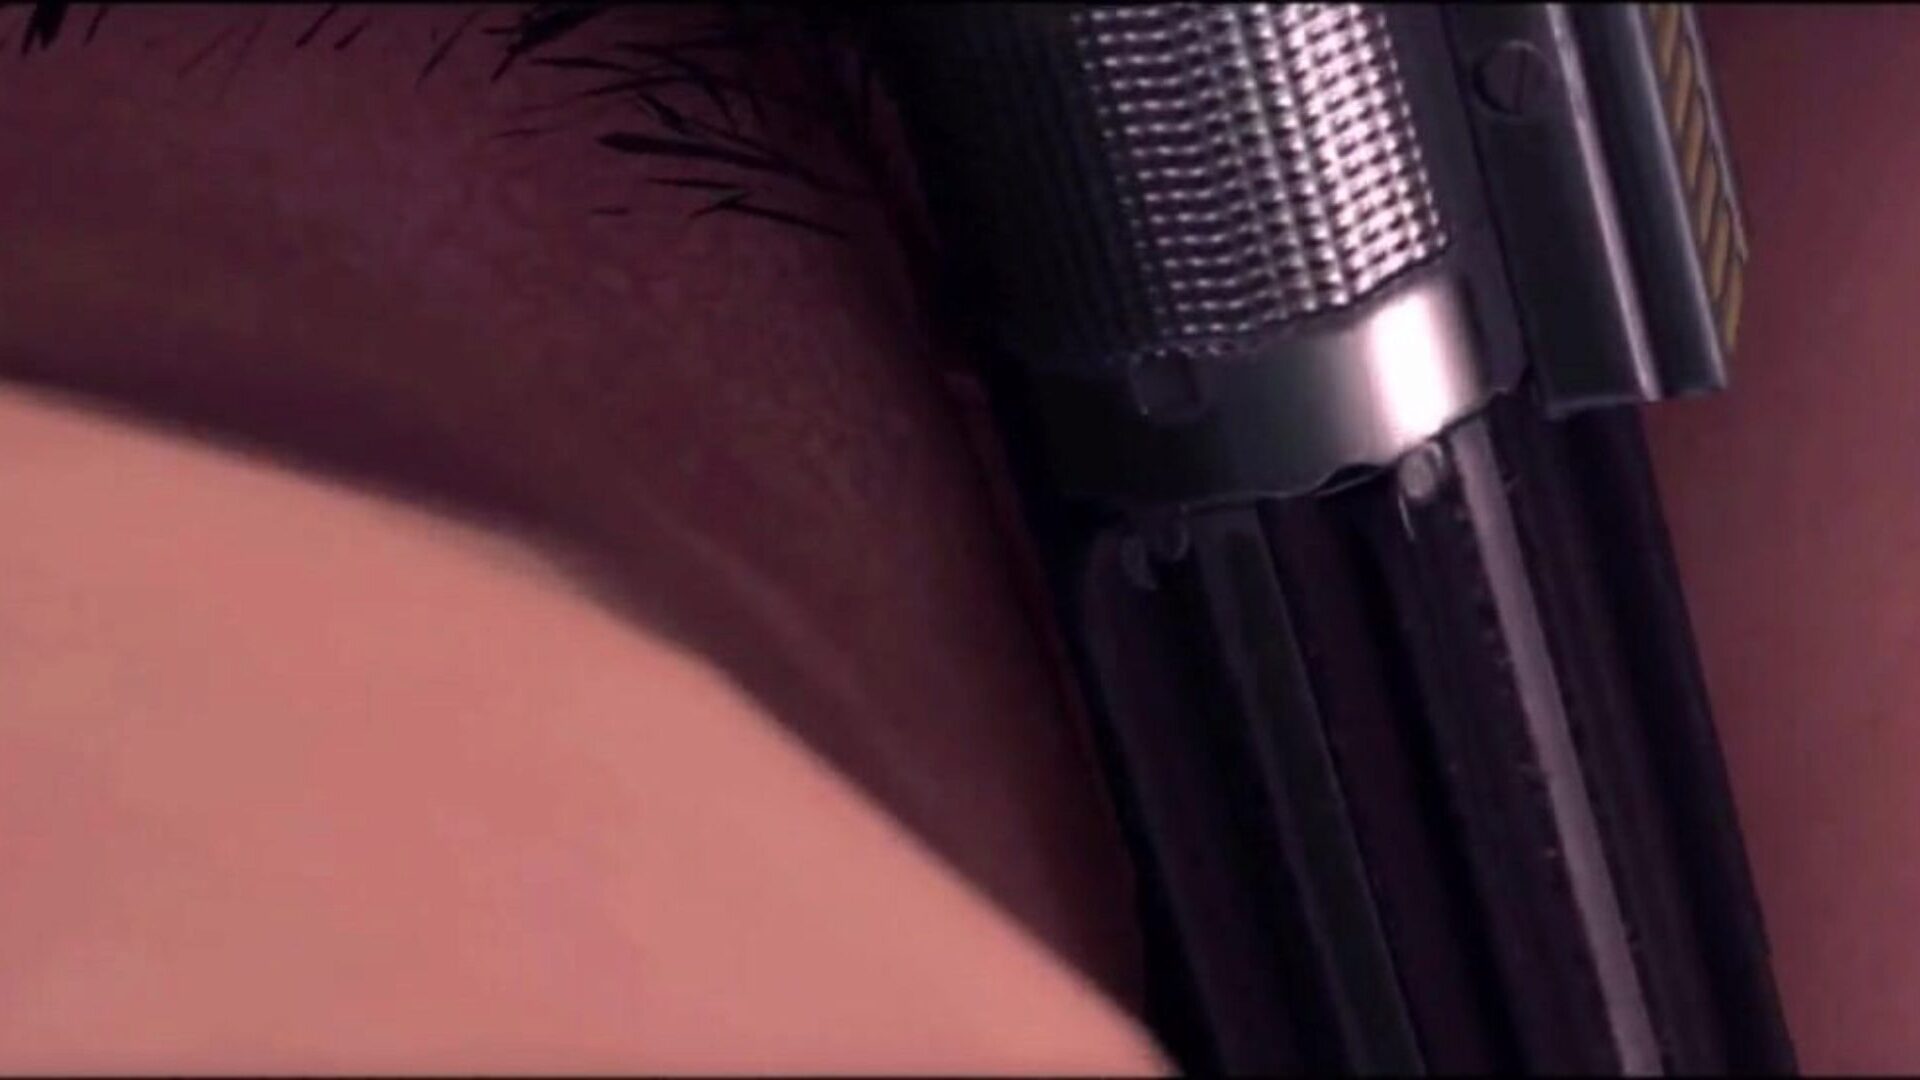 Star Wars Collection 3 - of the Dick, HD Porn da: xHamster Watch Star Wars Collection 3 - of the Dick clip on xHamster, the huge HD bang-out tube web site with tons of free Cartoon & Hentai porn clips